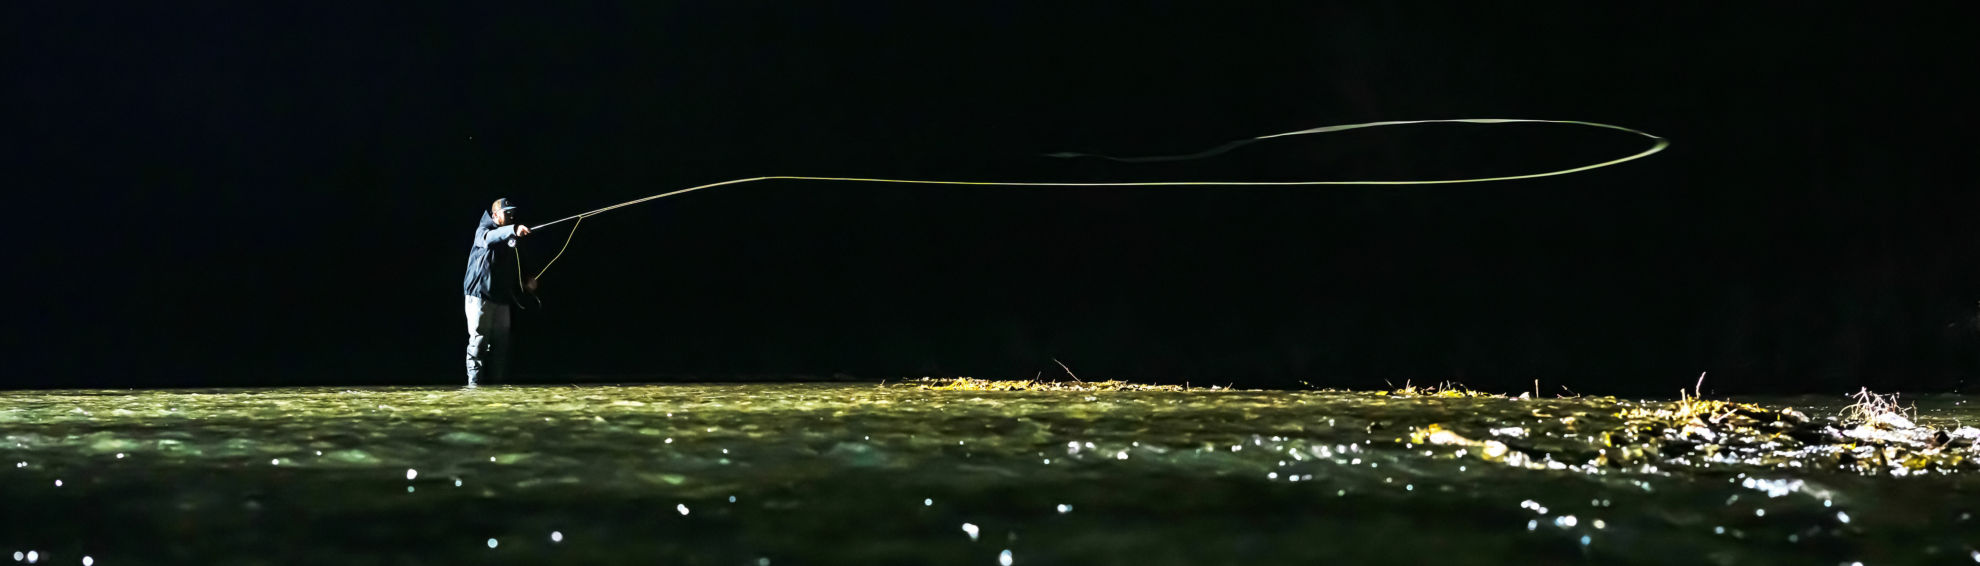 An angler casts across green waters in the dark of night.